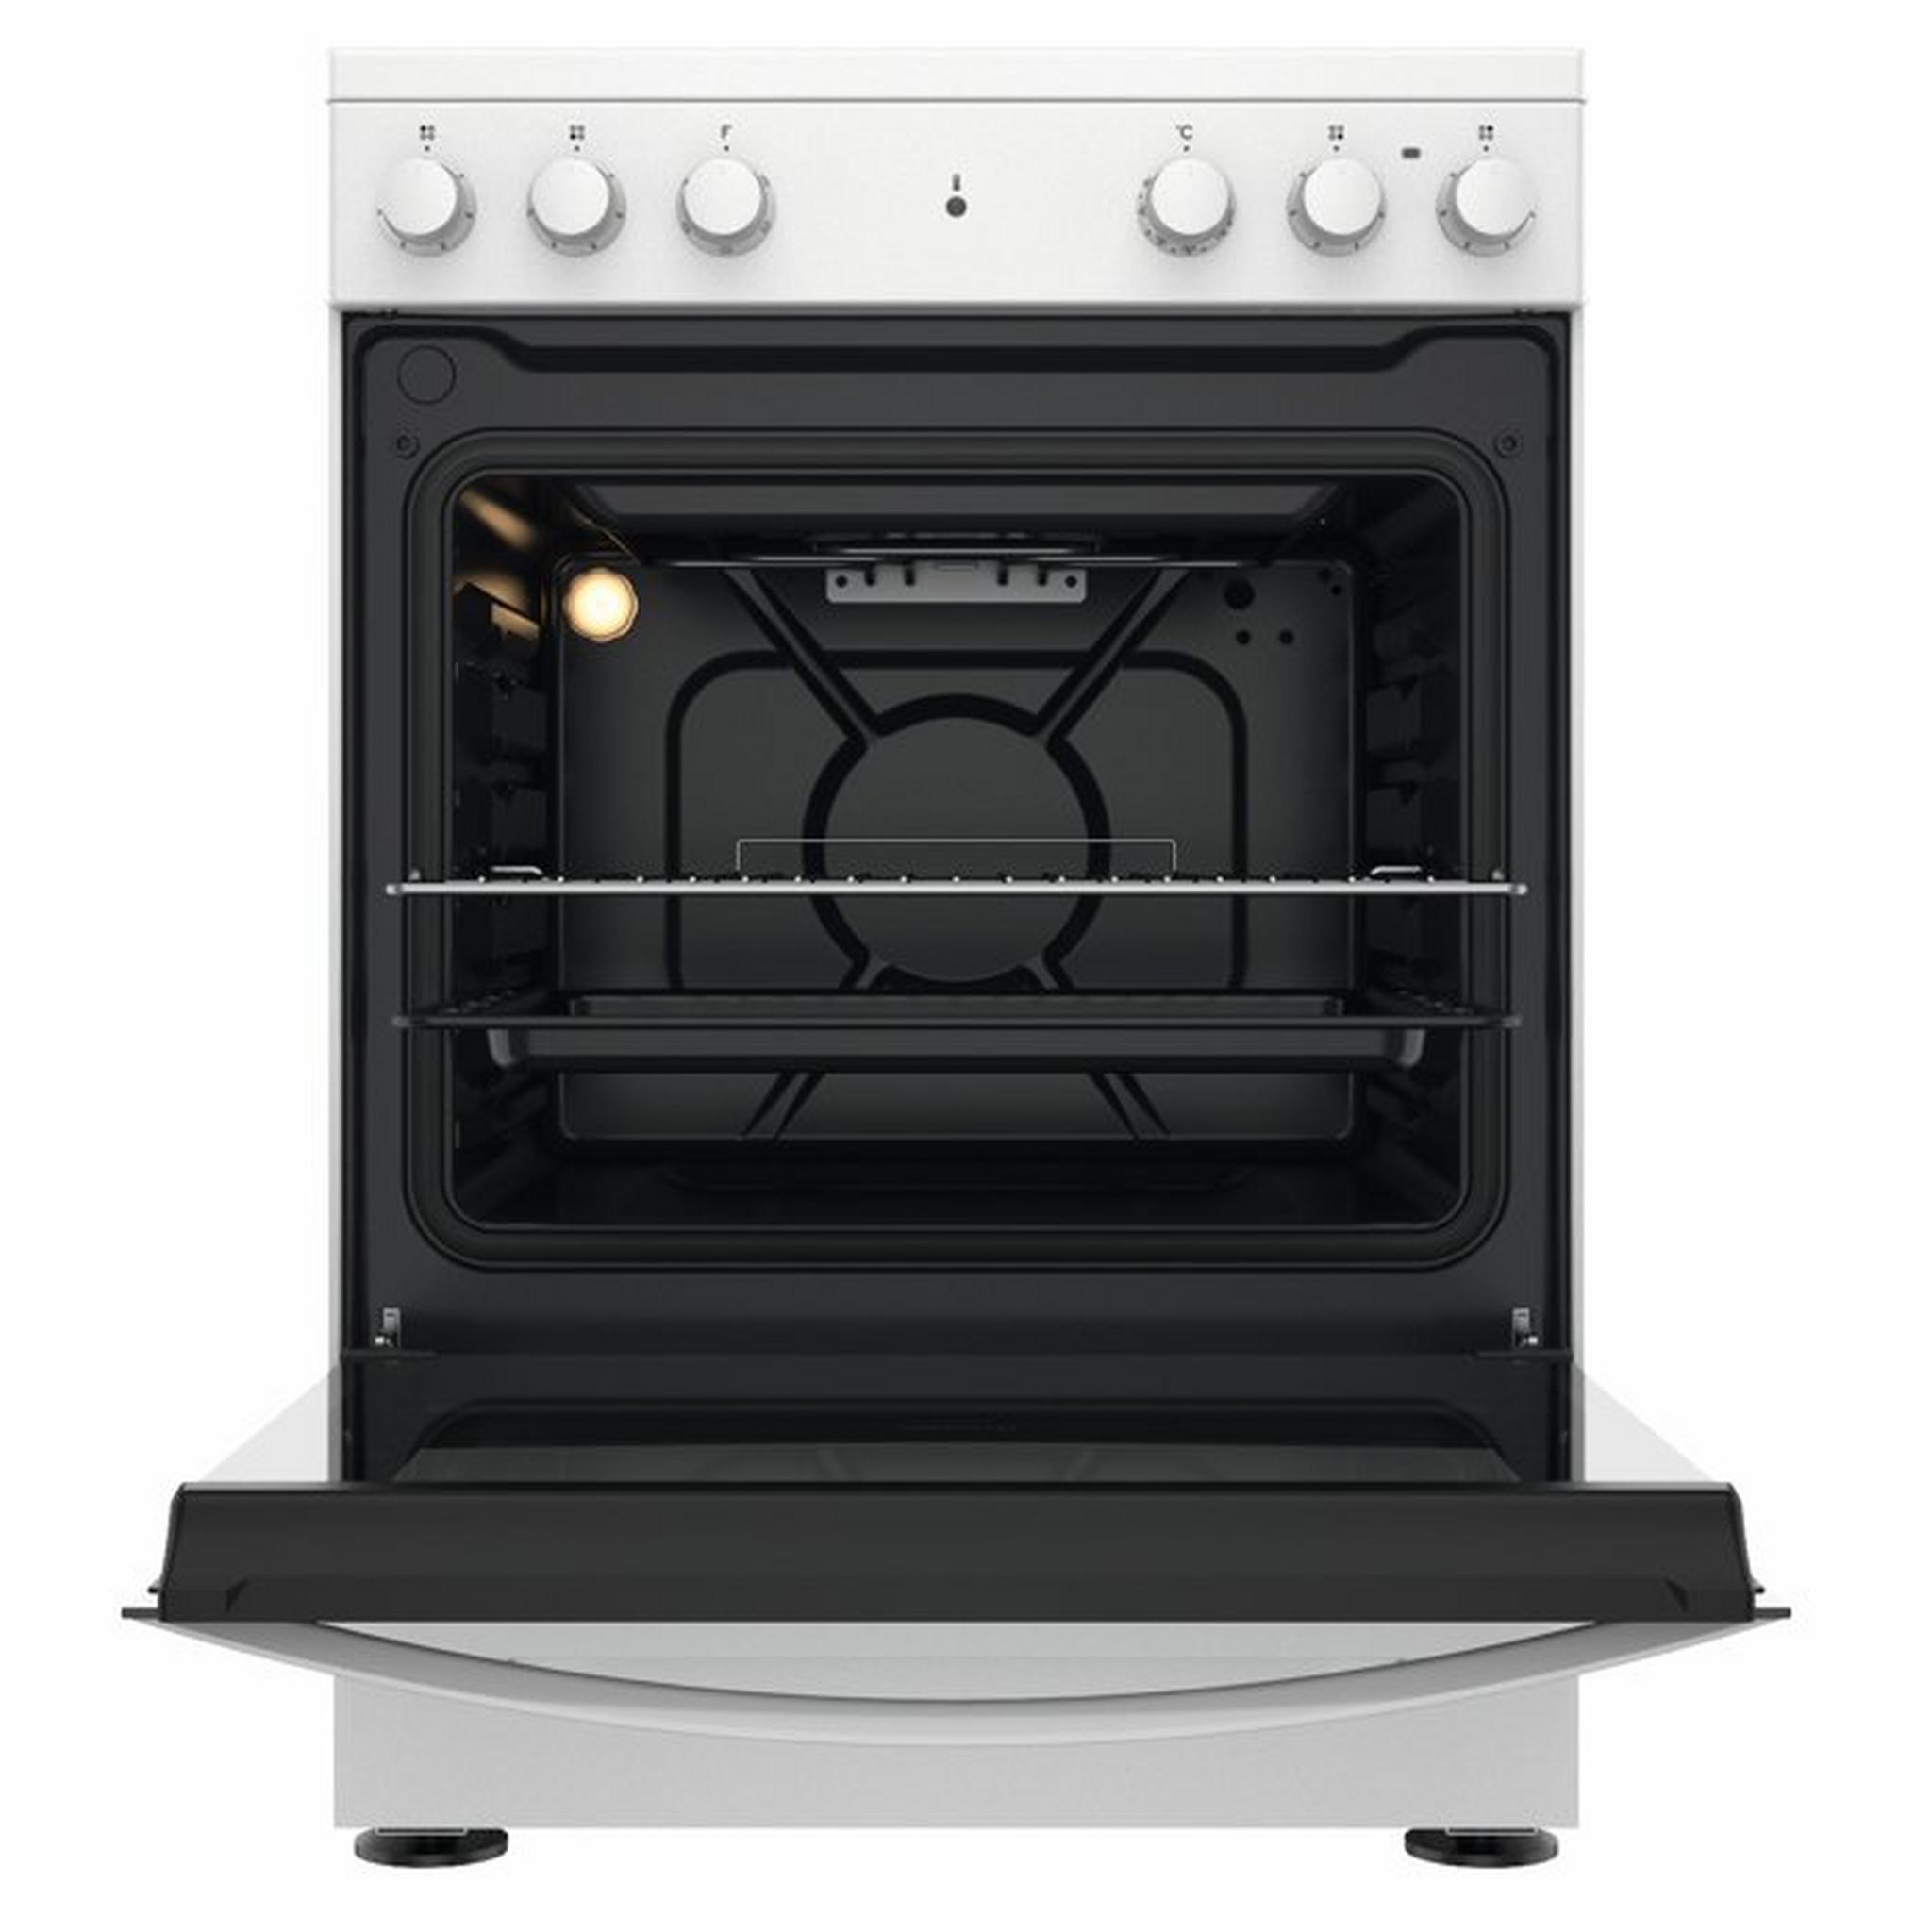 Indesit 4 Burners Standing Electric Cooker, 60x60cm, IS67E4KHW/MEA - White